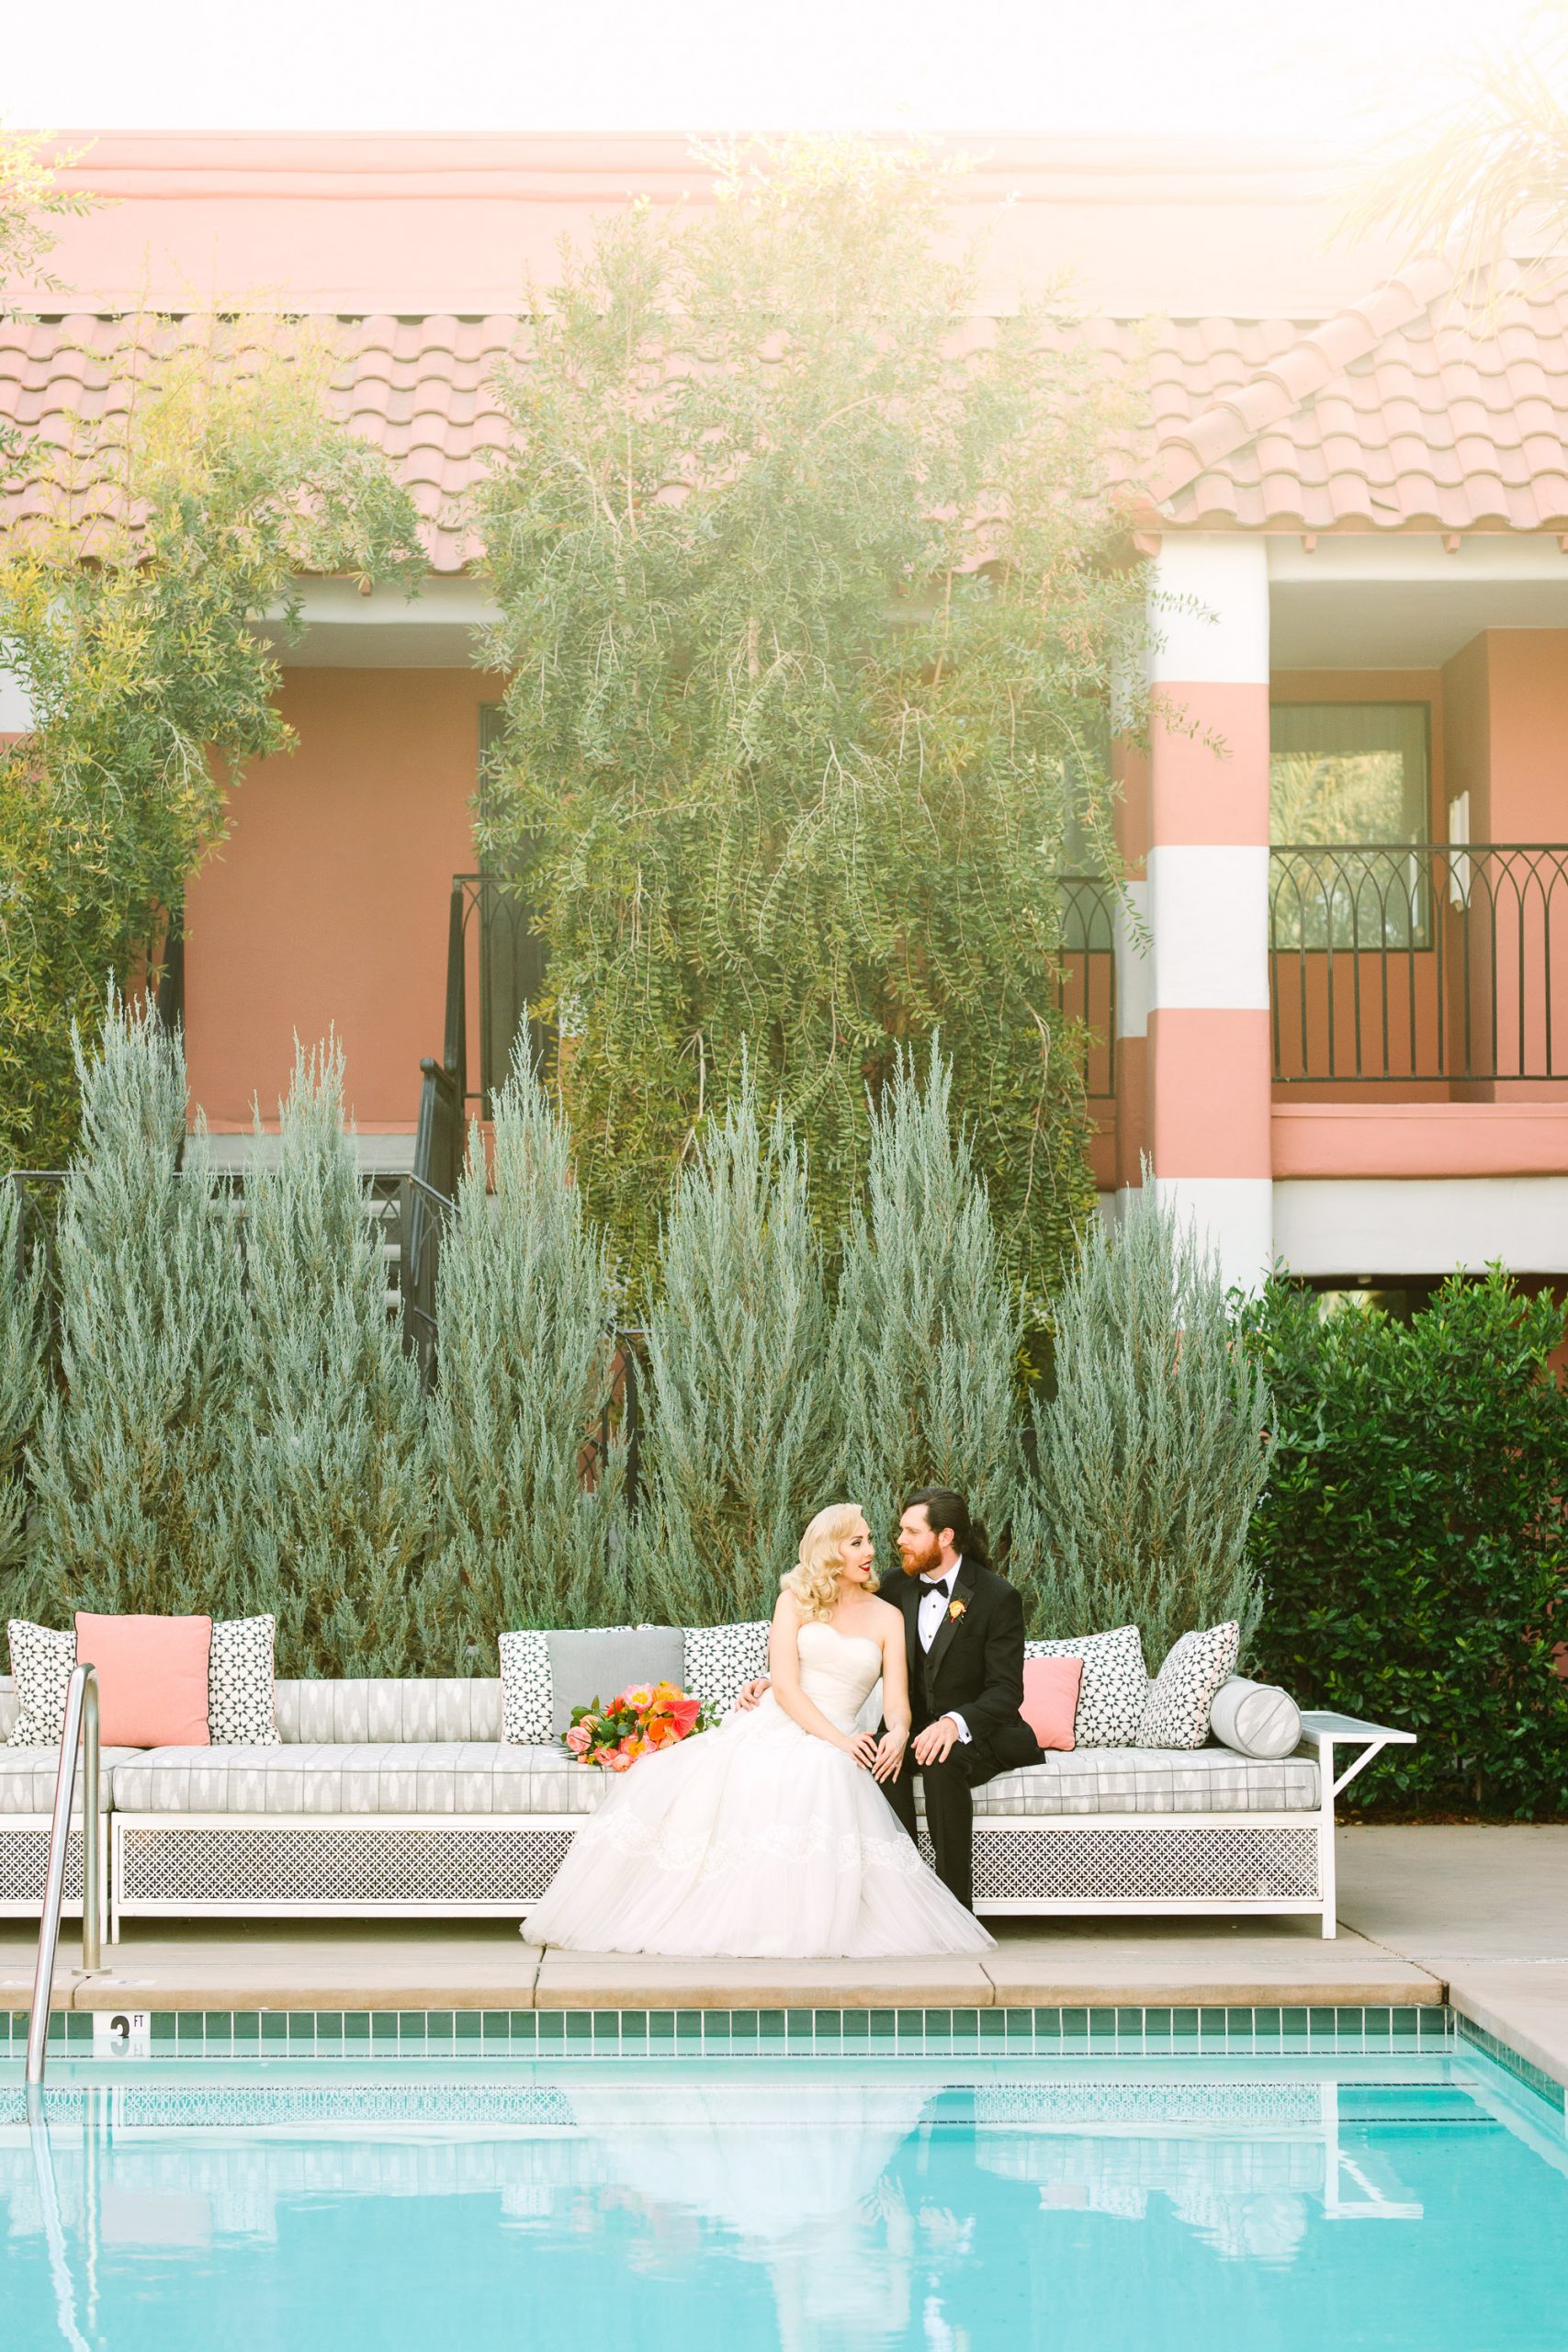 Wedding portrait of couple by pool